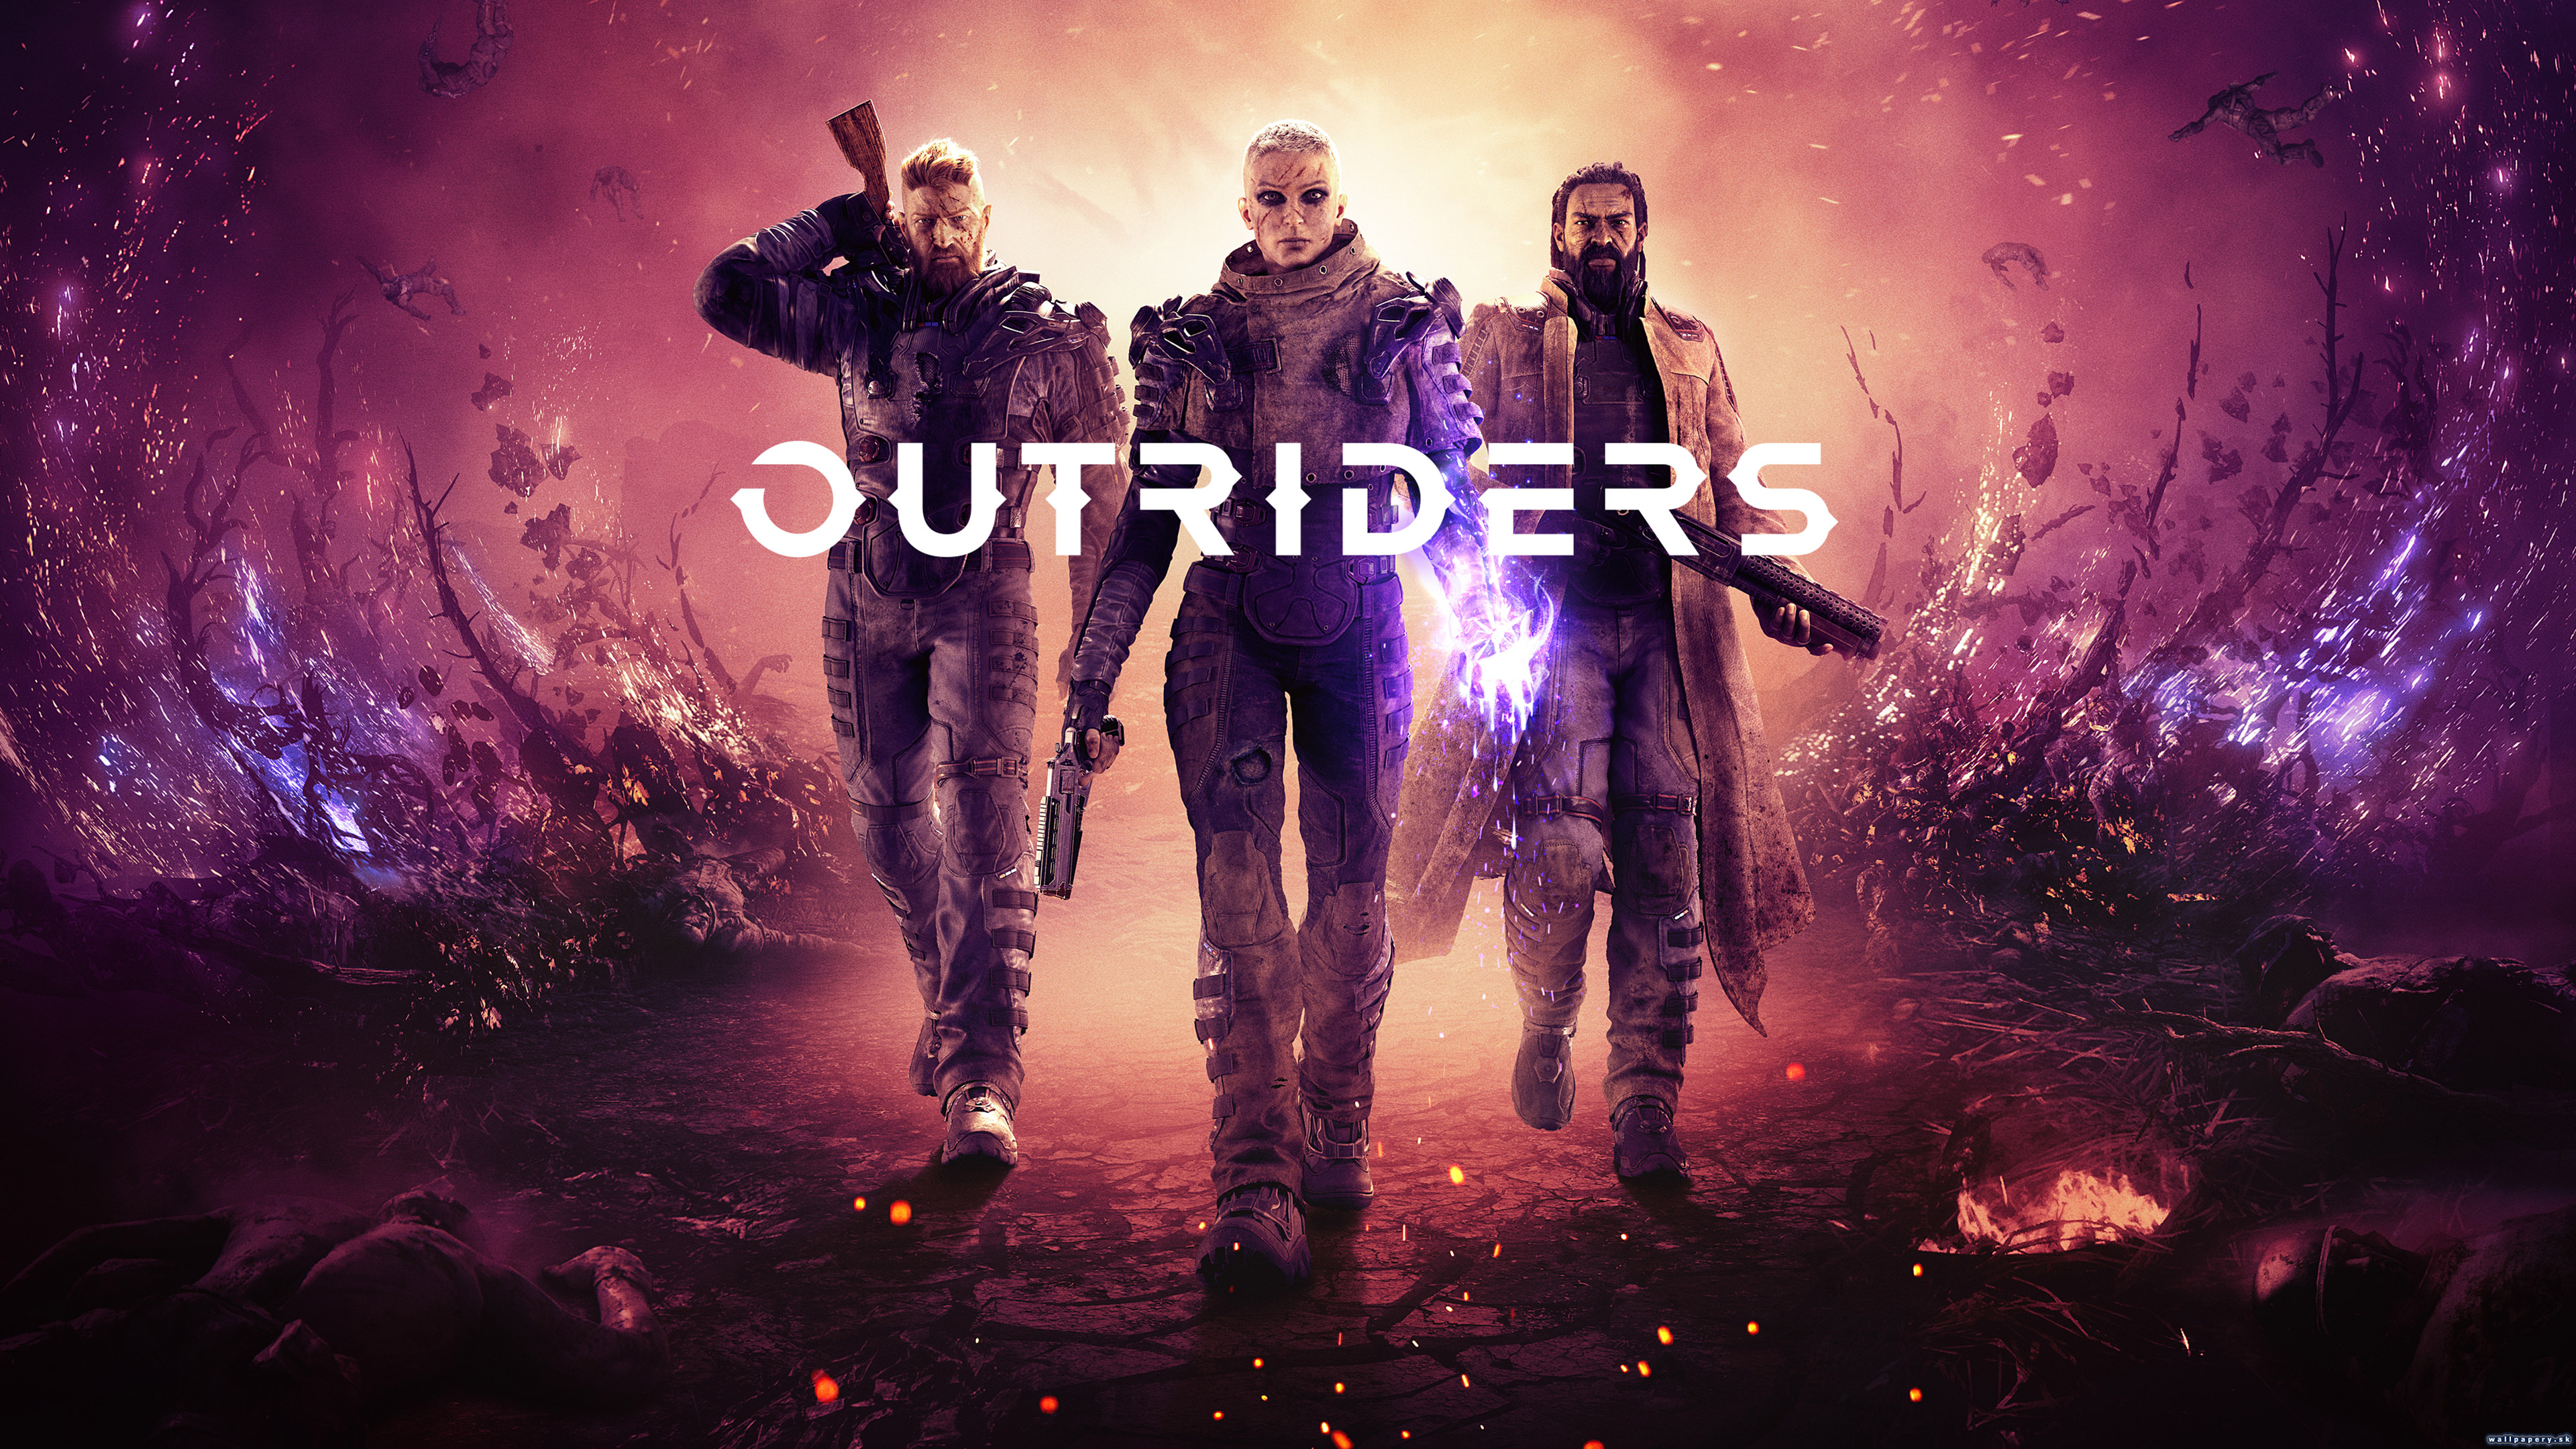 Outriders - wallpaper 1